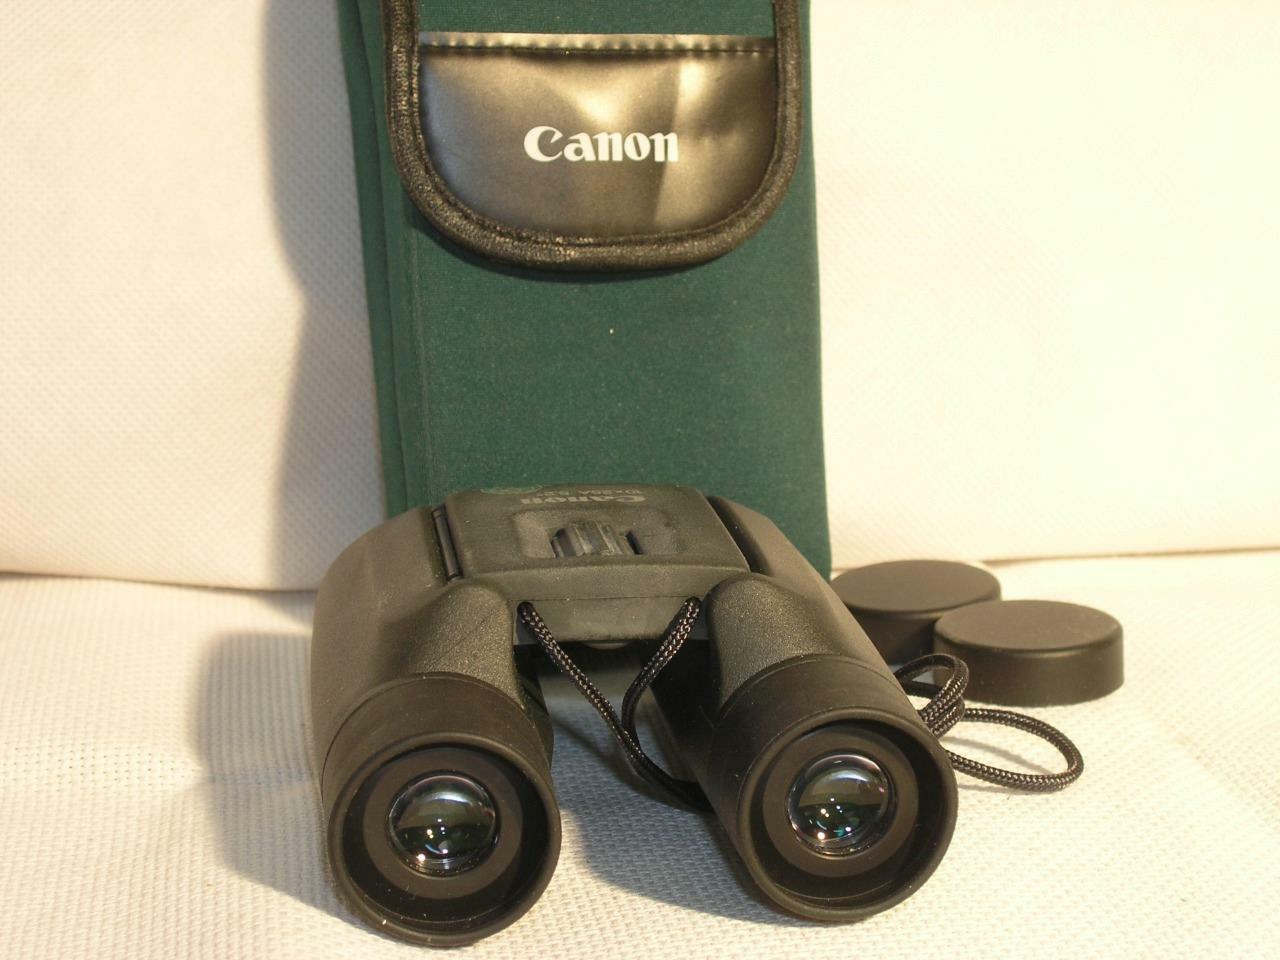 Compact Canon 10x25A 5.2 Degree Center Focus Rubberized Palm Size Binoculars